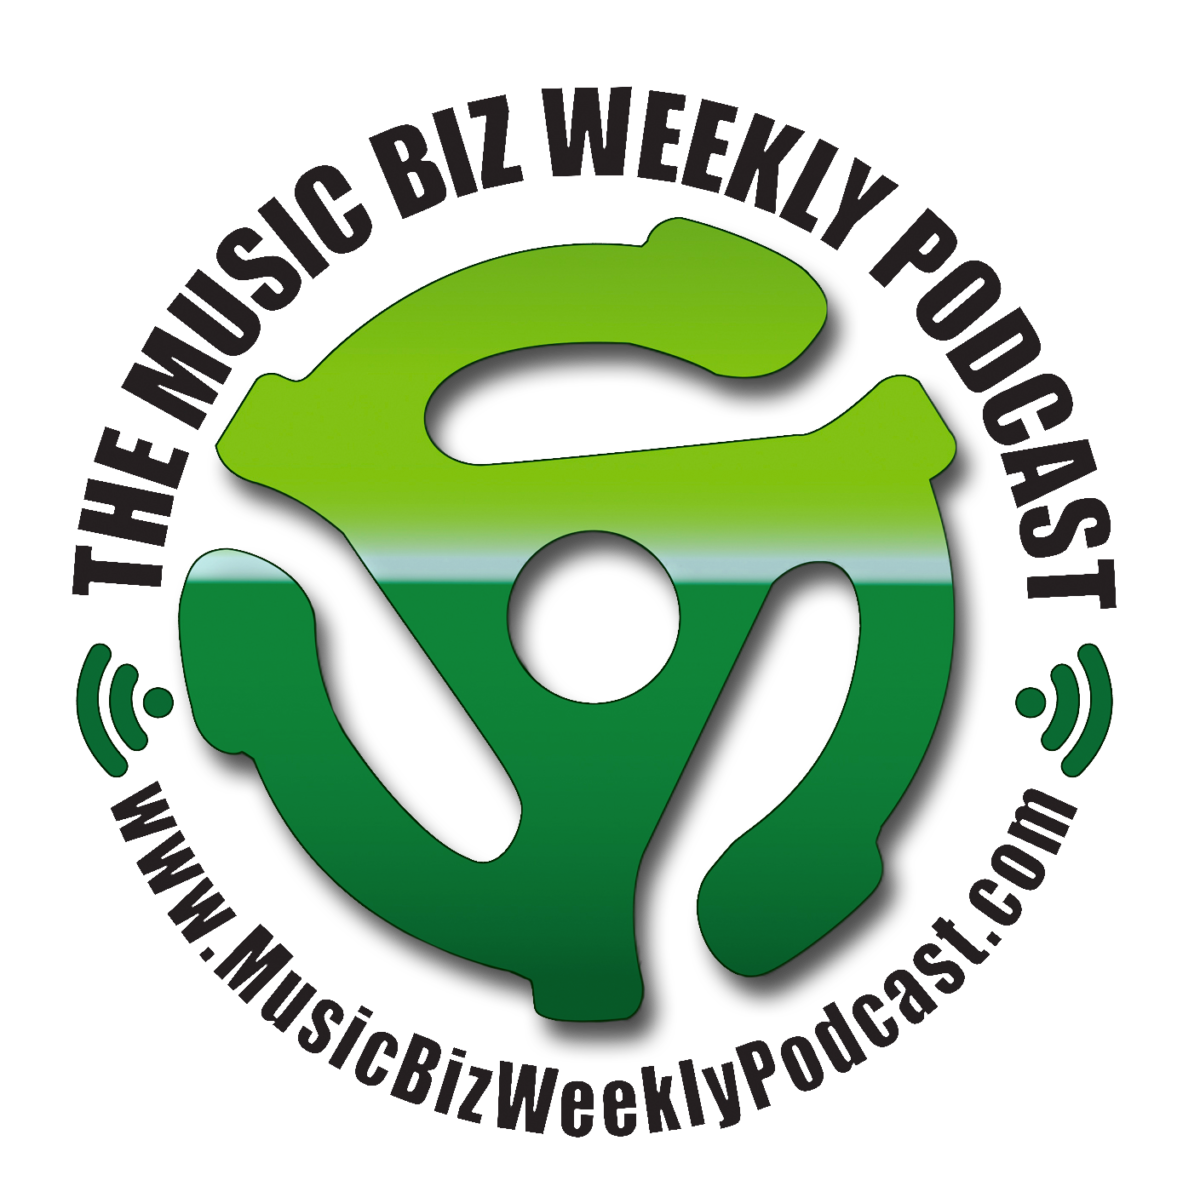 The Music Biz Weekly Podcast Charlie Davis Talks About the New